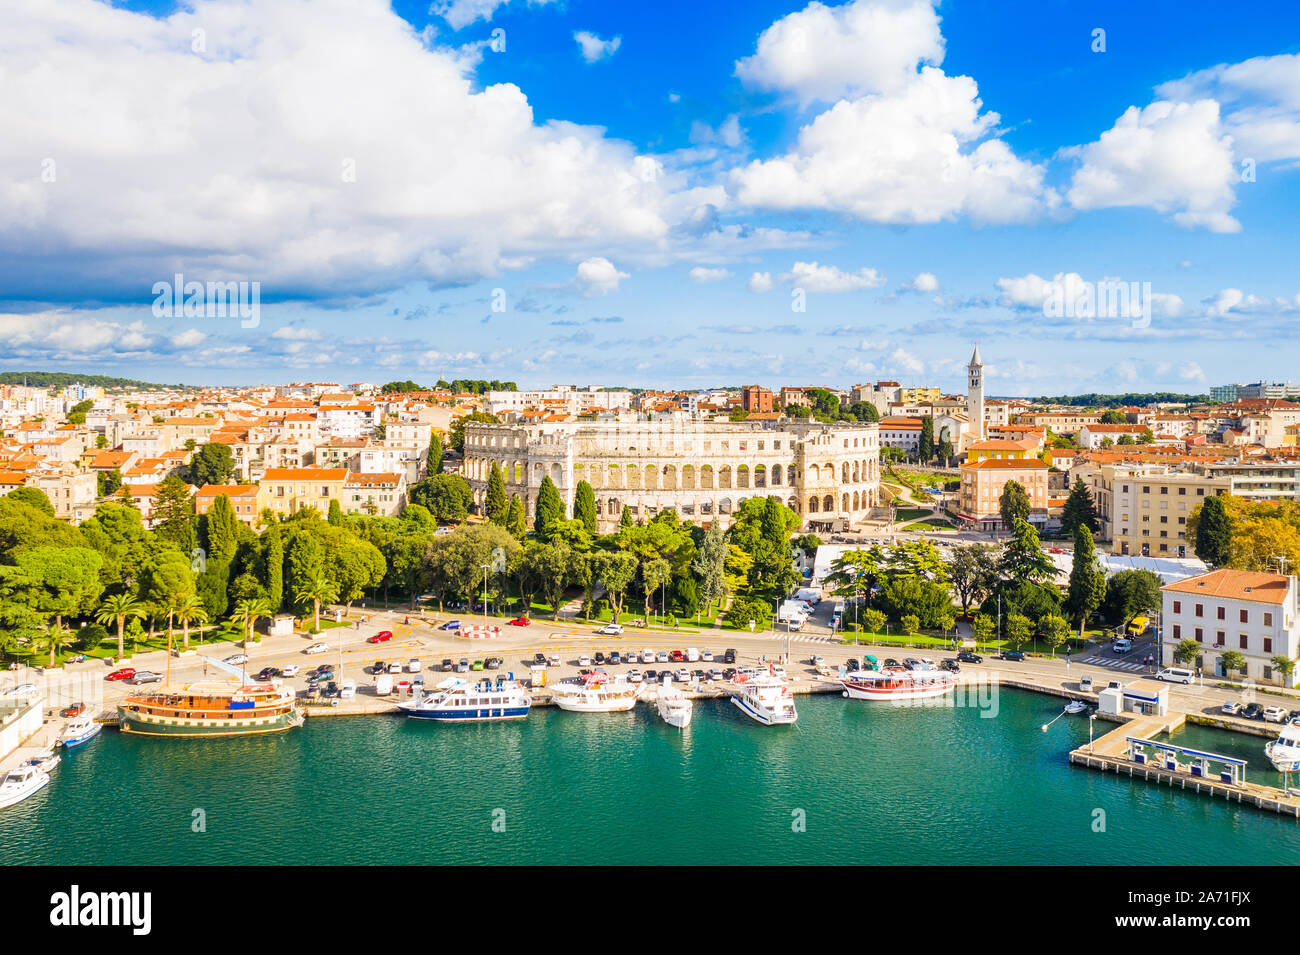 Croatia, city of Pula, ancient Roman arena, historic amphitheater and old town center from drone, aerial view Stock Photo